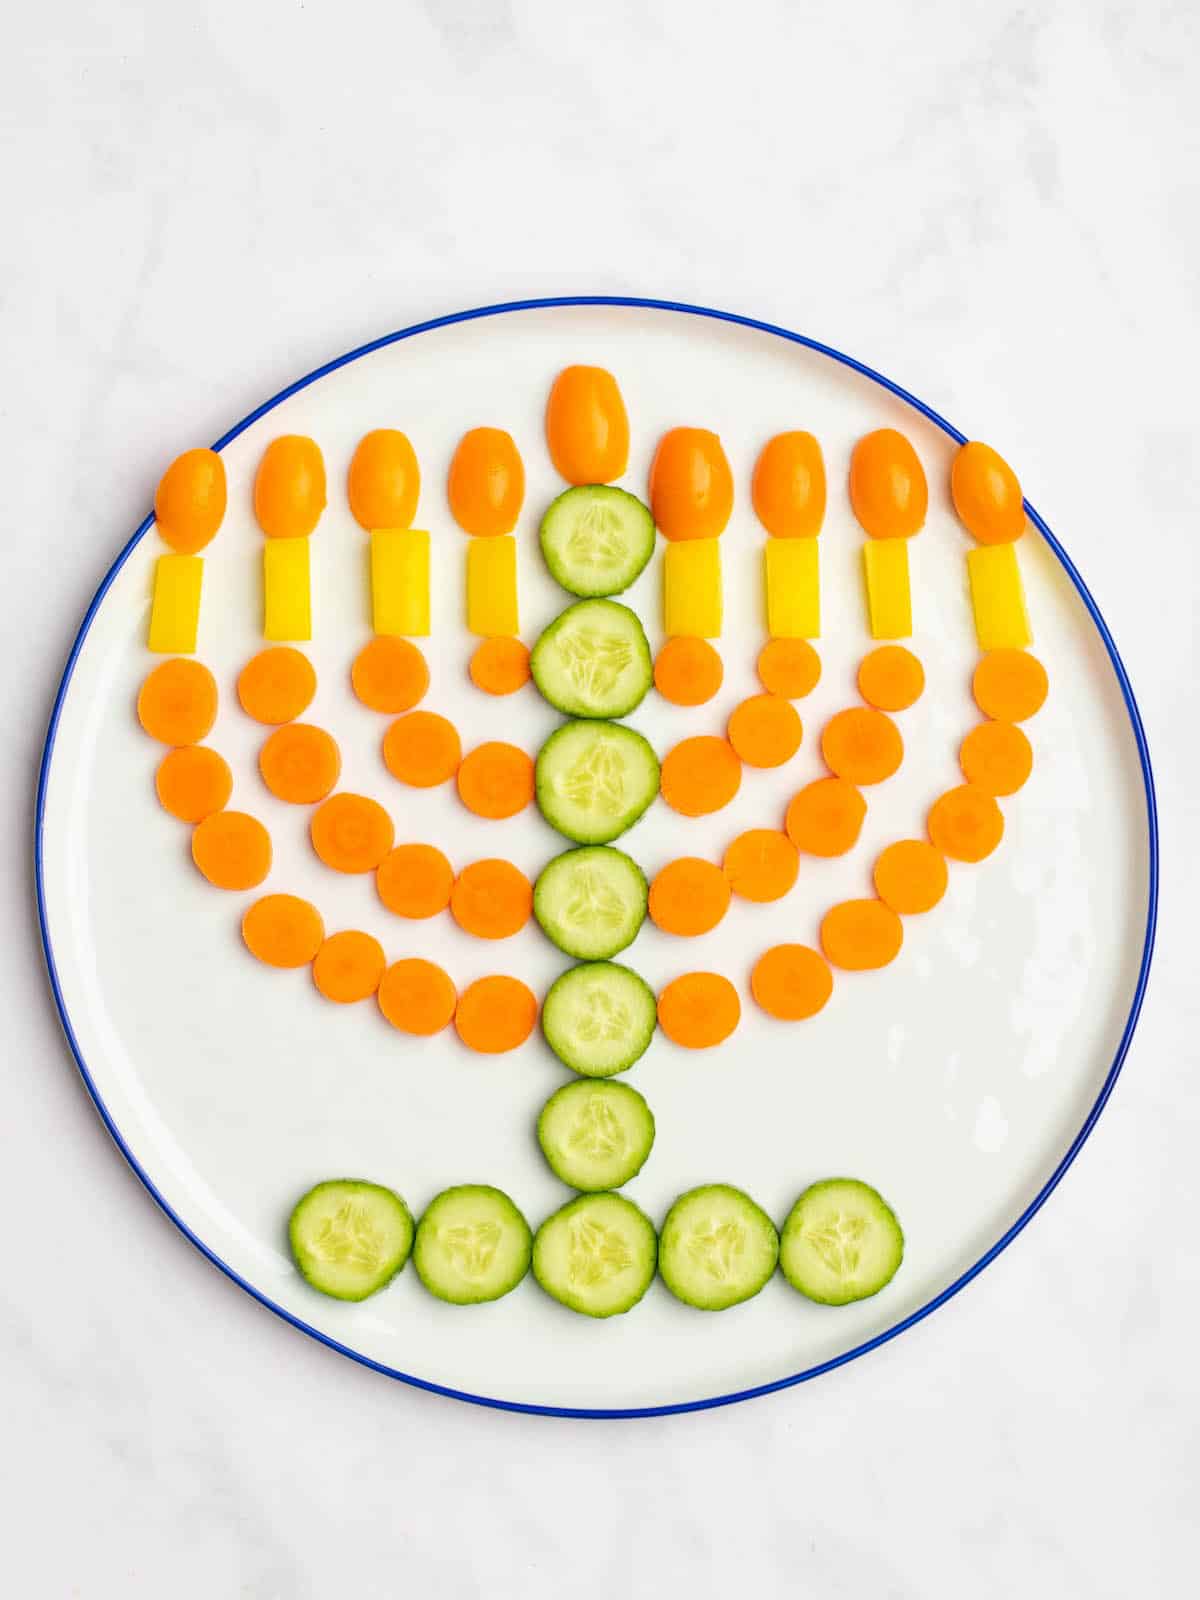 Vegetables arranged on a plate in the shape of a menorah for Hanukkah.